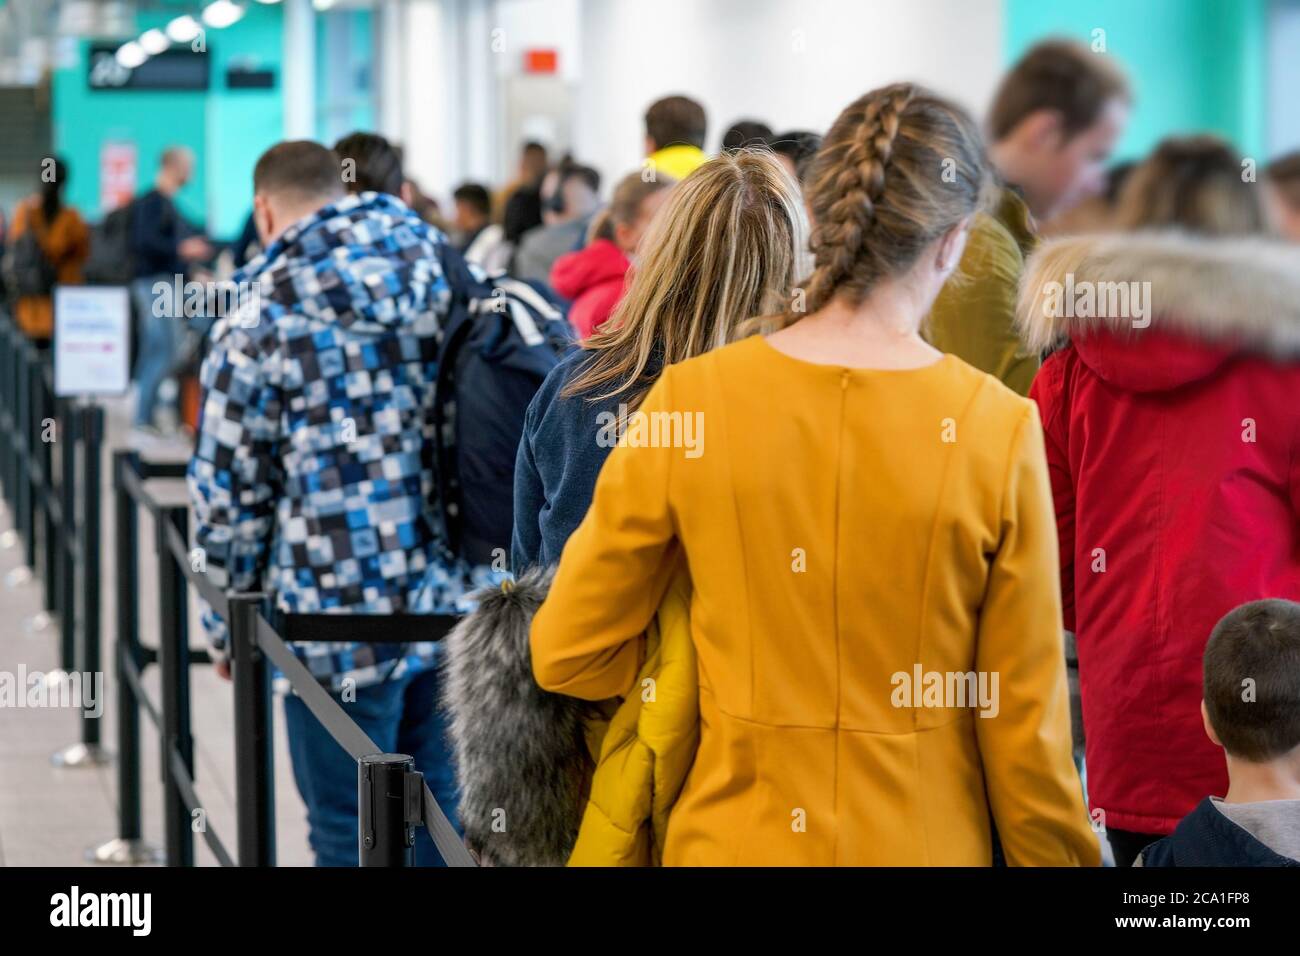 Group of anonymous people waiting at airport gate line to board an airplane, queue crowd seen from behind. Stock Photo